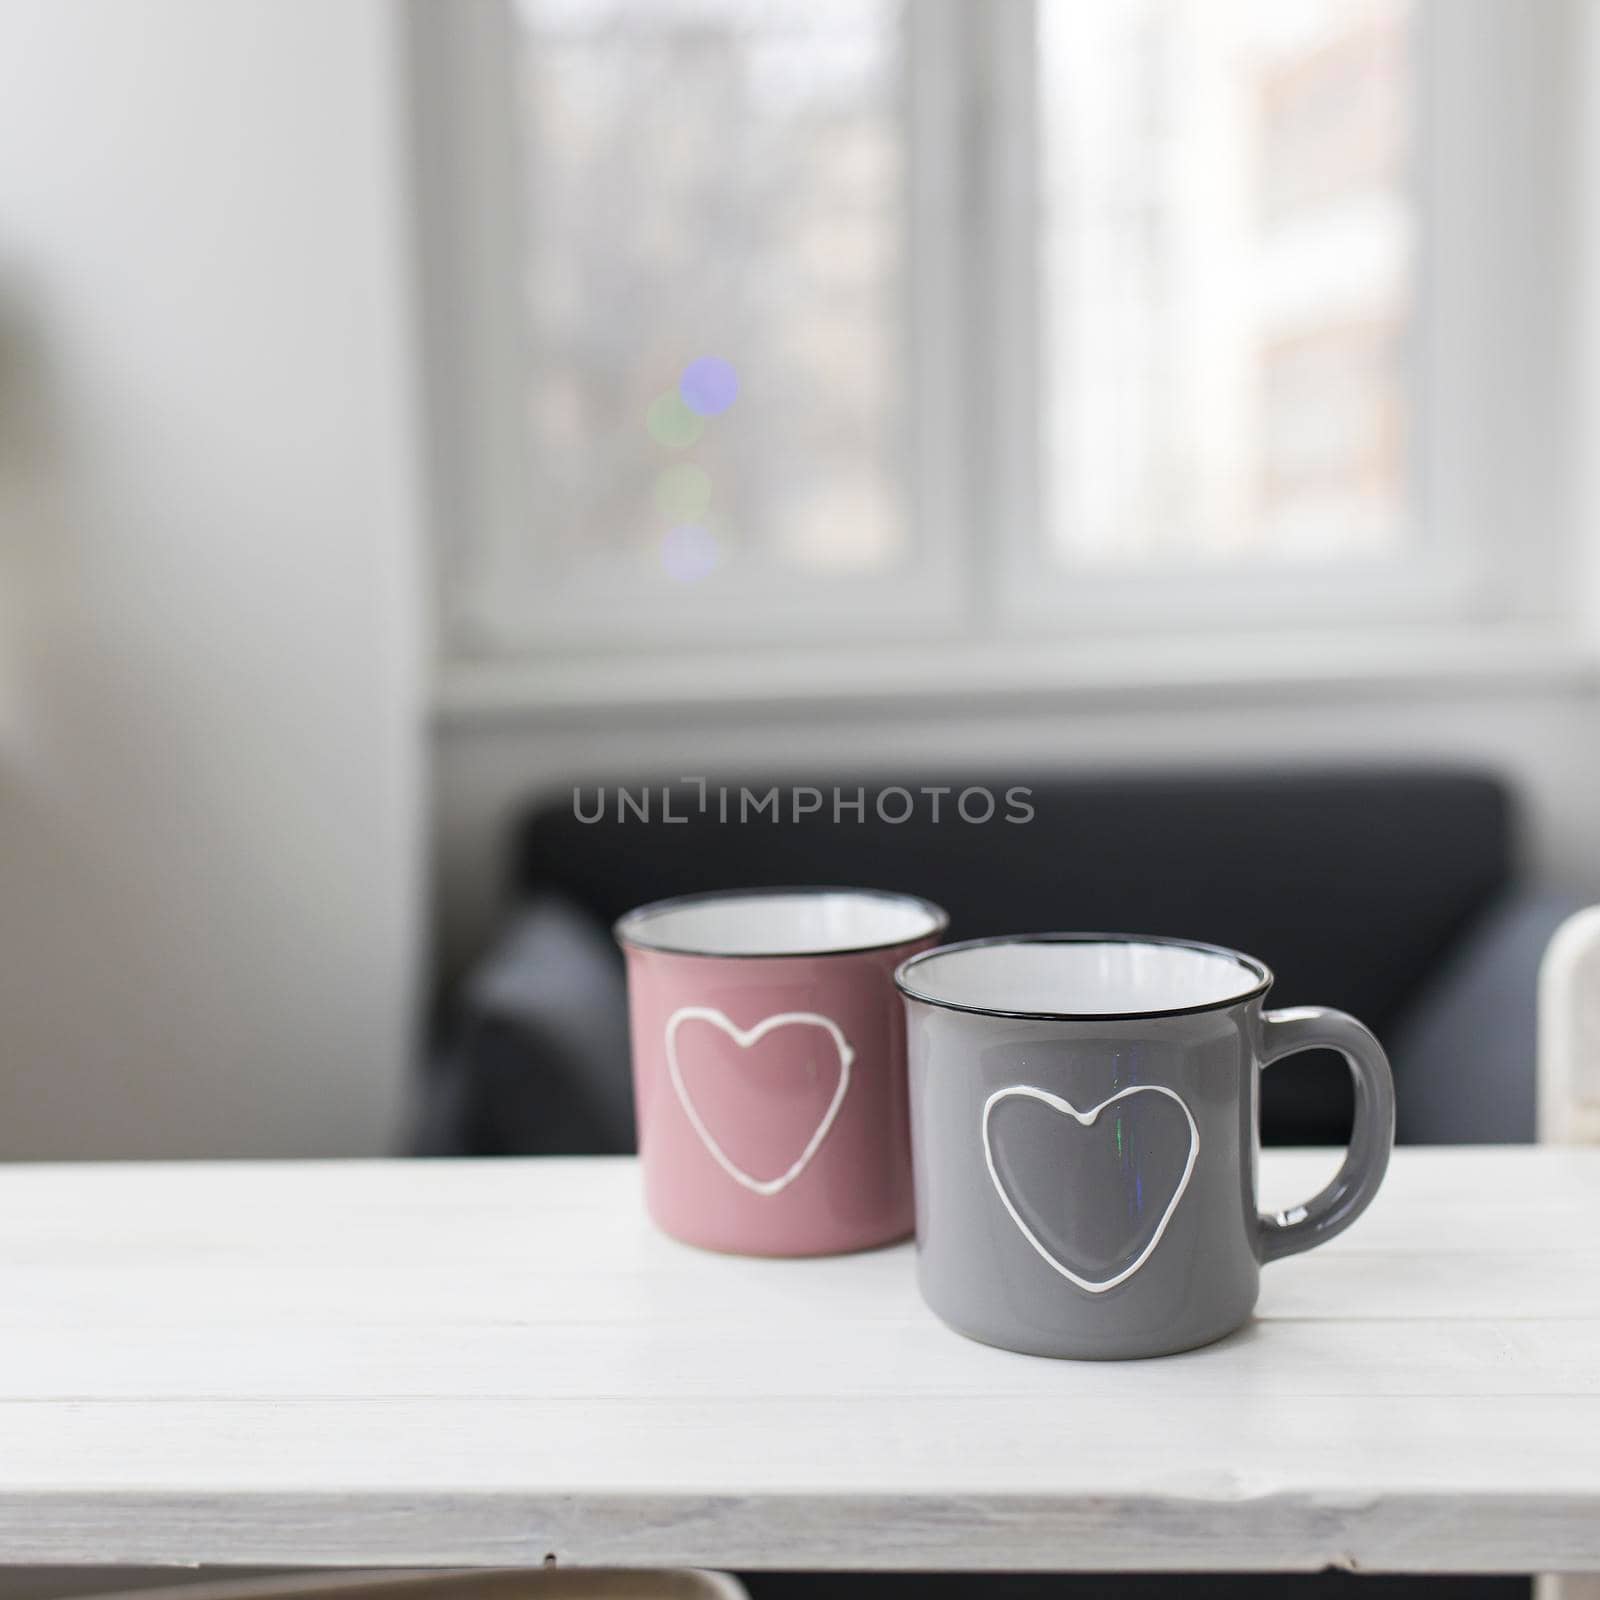 Gray and pink with hearts enamel cups sit on the table in front of the window. Valentine's Day.